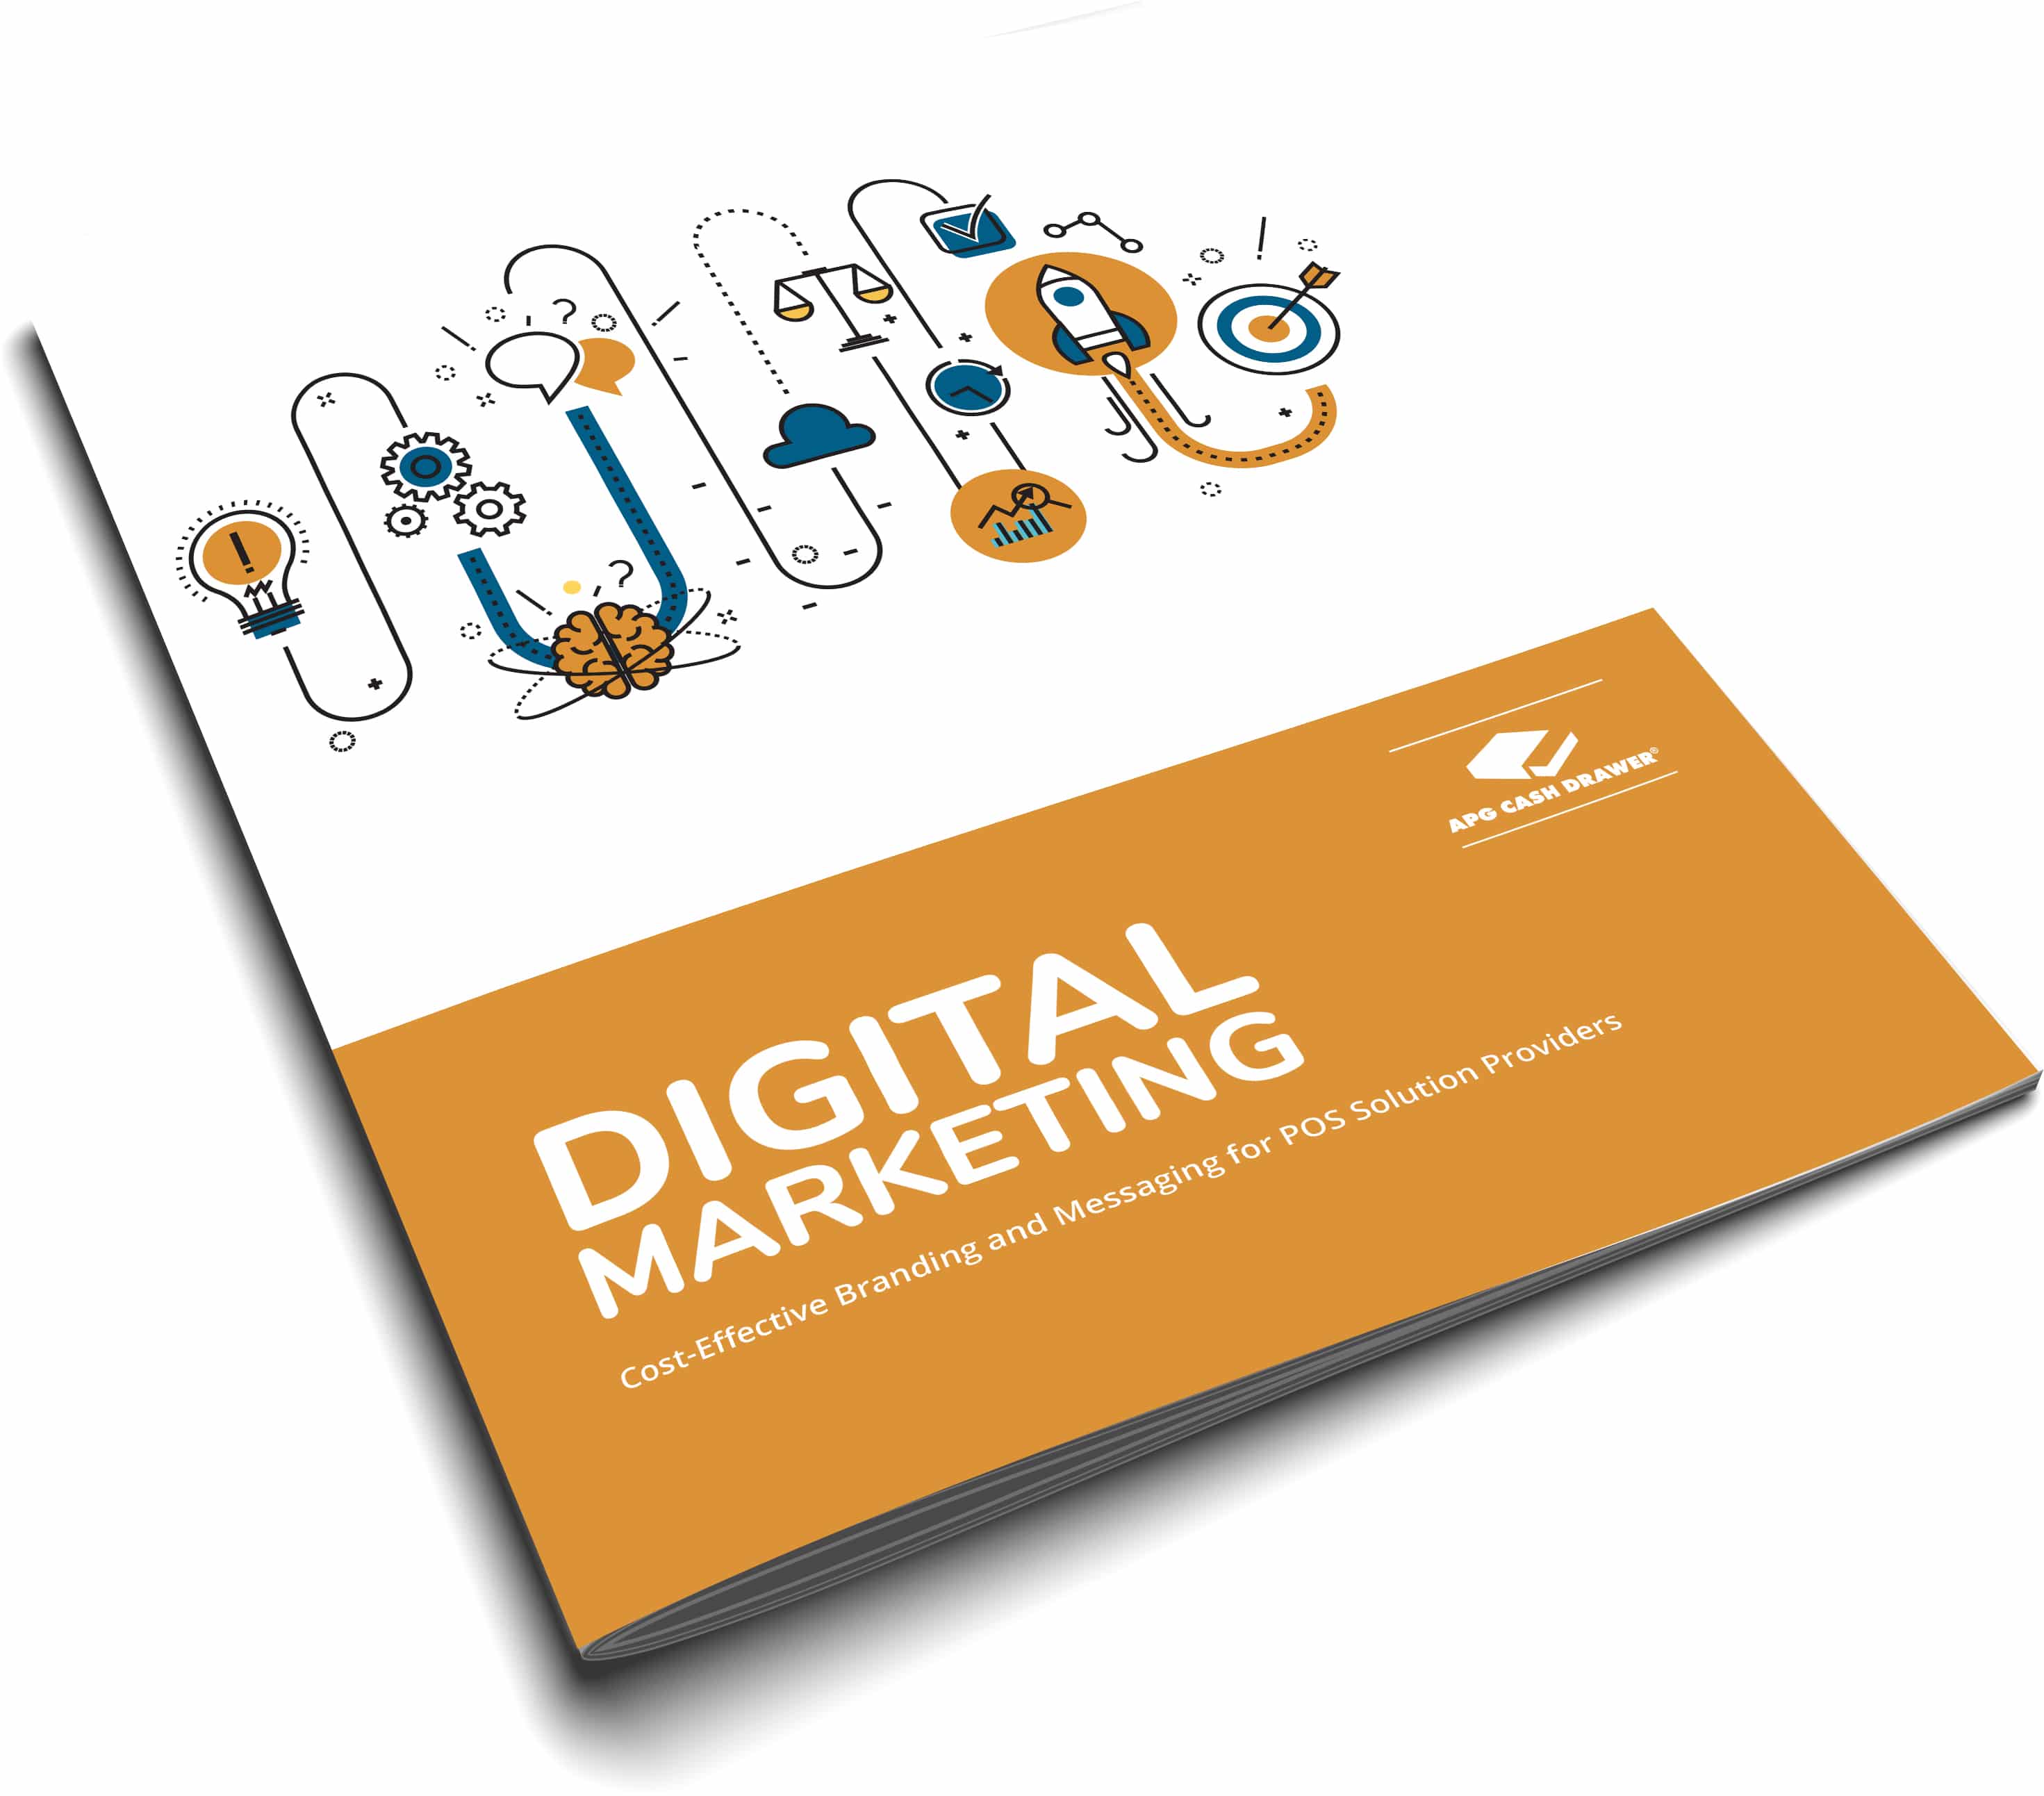 A Guide to Digital Marketing for POS Providers